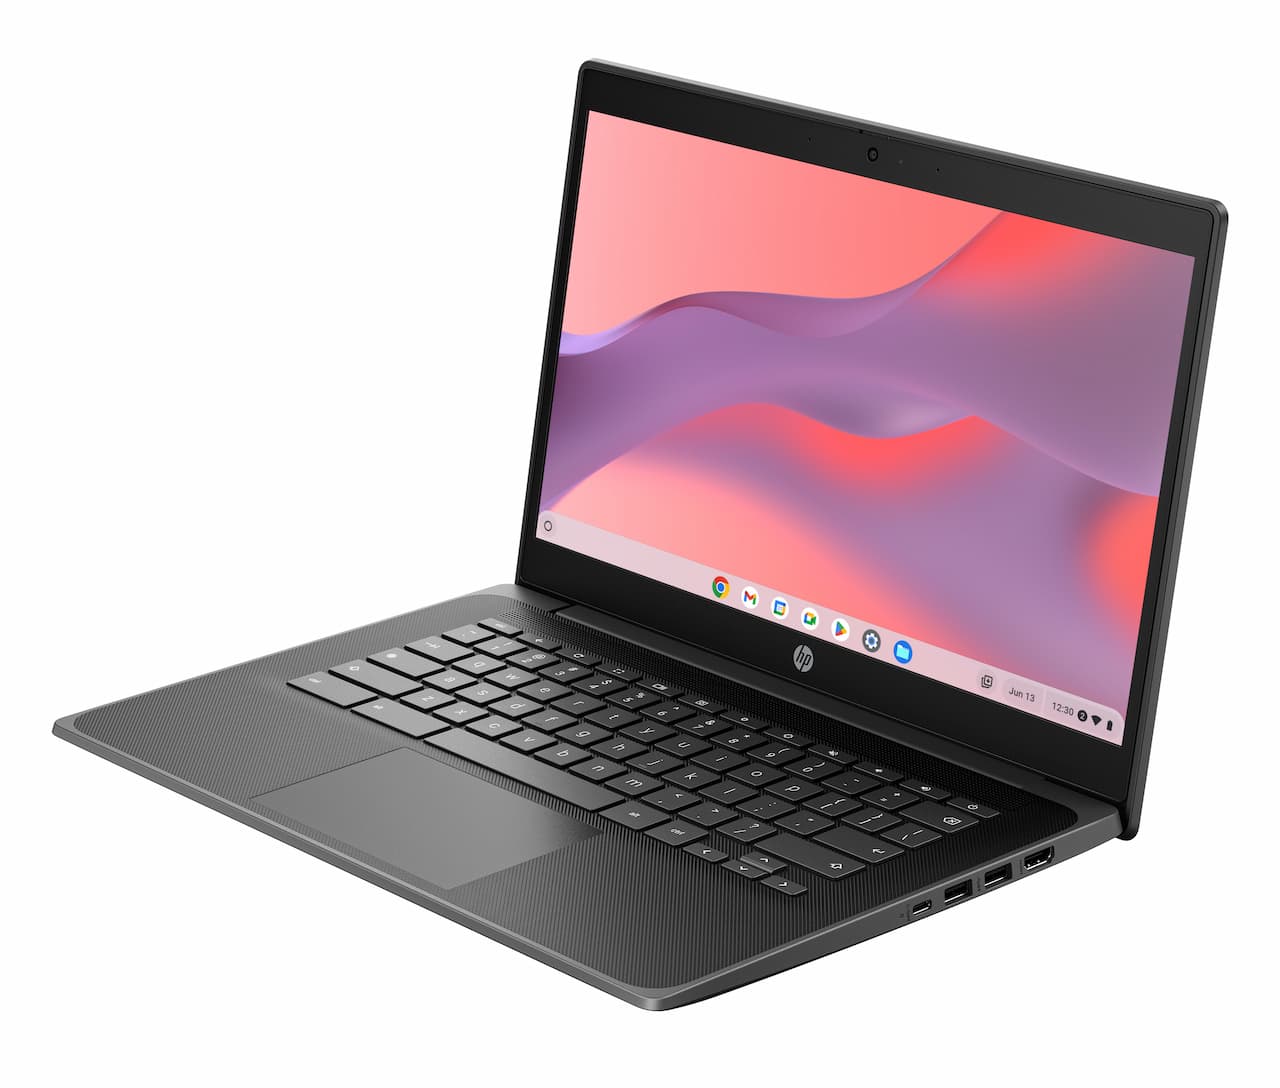 The HP Fortis 14-inch G11 is one of three new Chromebooks launched at CES